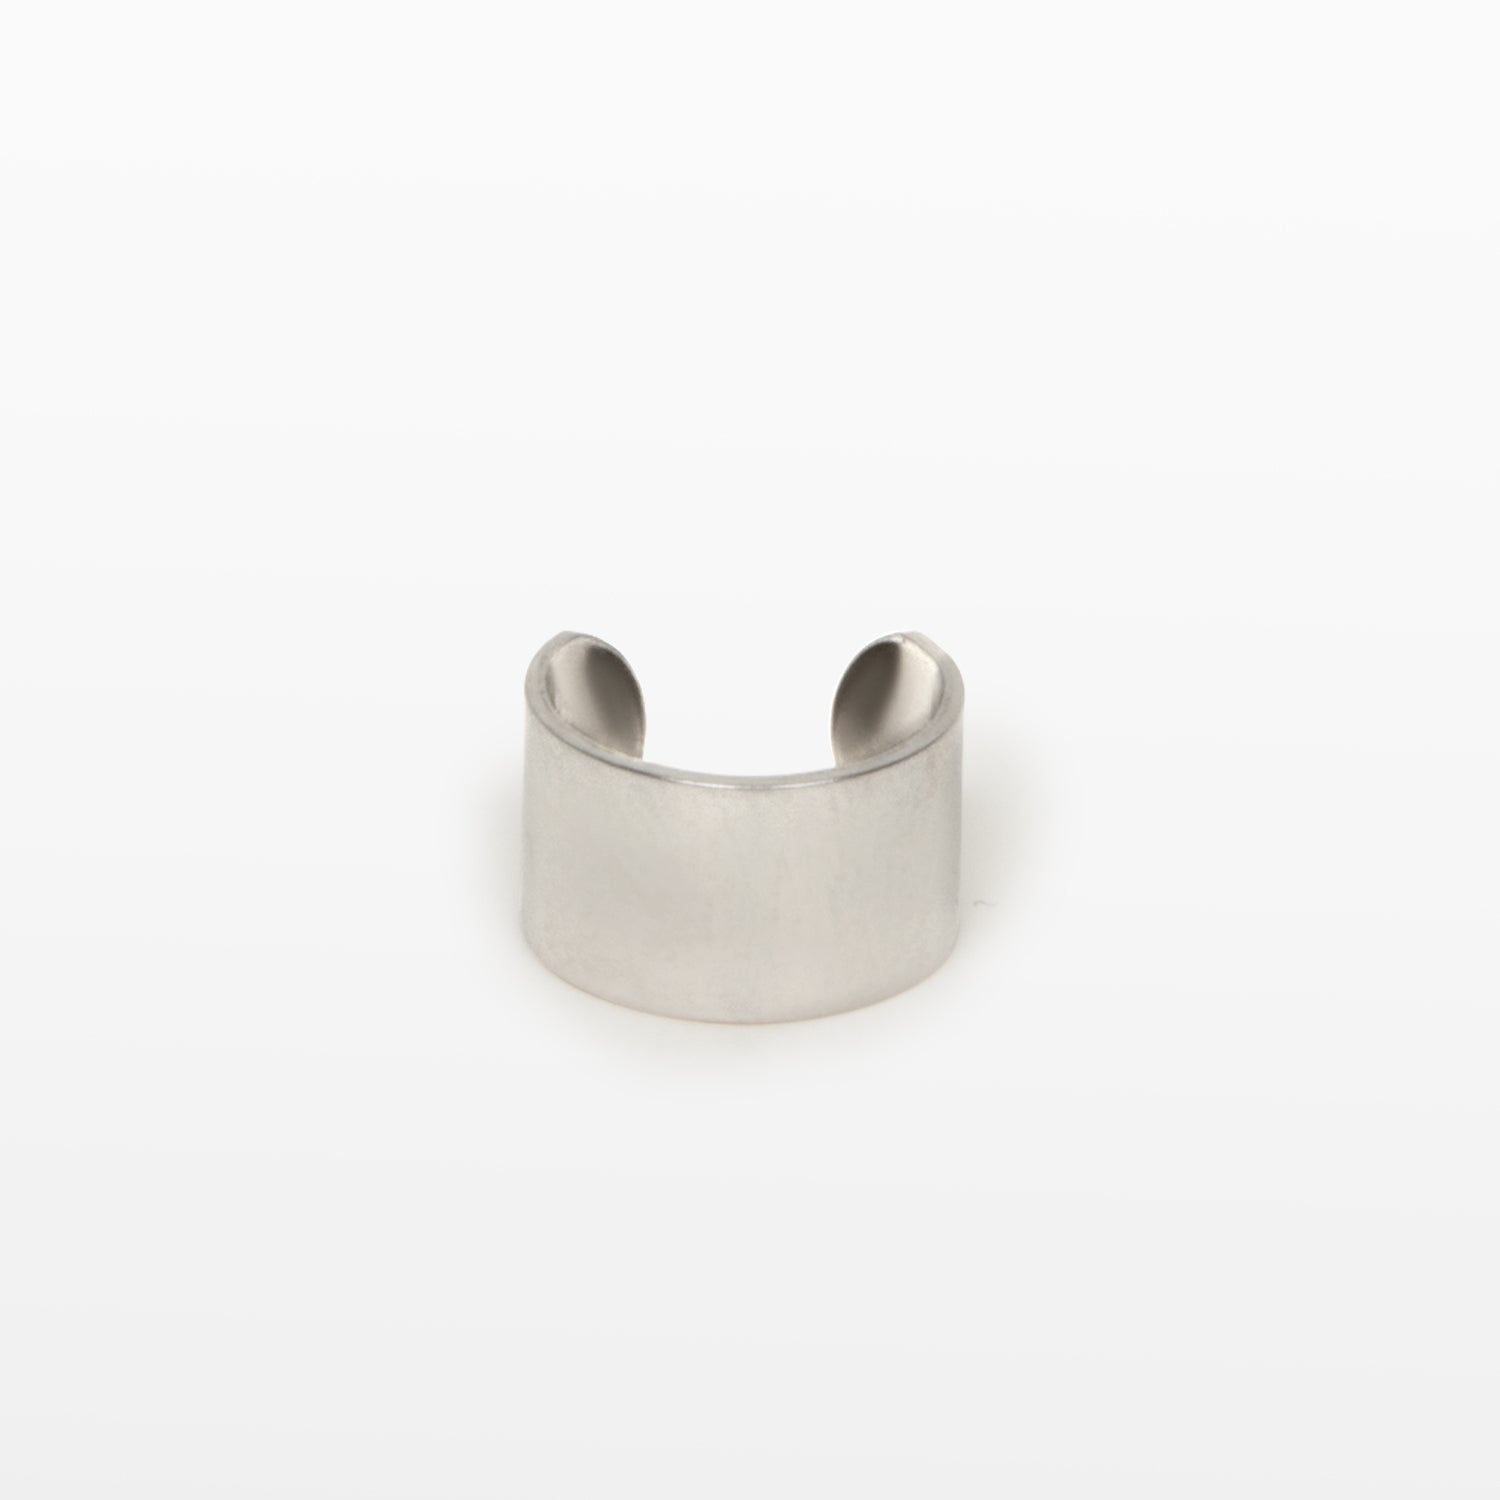 Image of the Cigar Band Ear Cuff, available in Silver, features a medium-strength secure hold and adjustable closure type. Crafted from Stainless Steel and Titanium, this cuff is suitable for use with all ear types, including thick/large ears, sensitive ears, small/thin ears, and stretched/healing ears. Please note, this item is sold as a single piece and is intended to be worn on the helix of the ear.